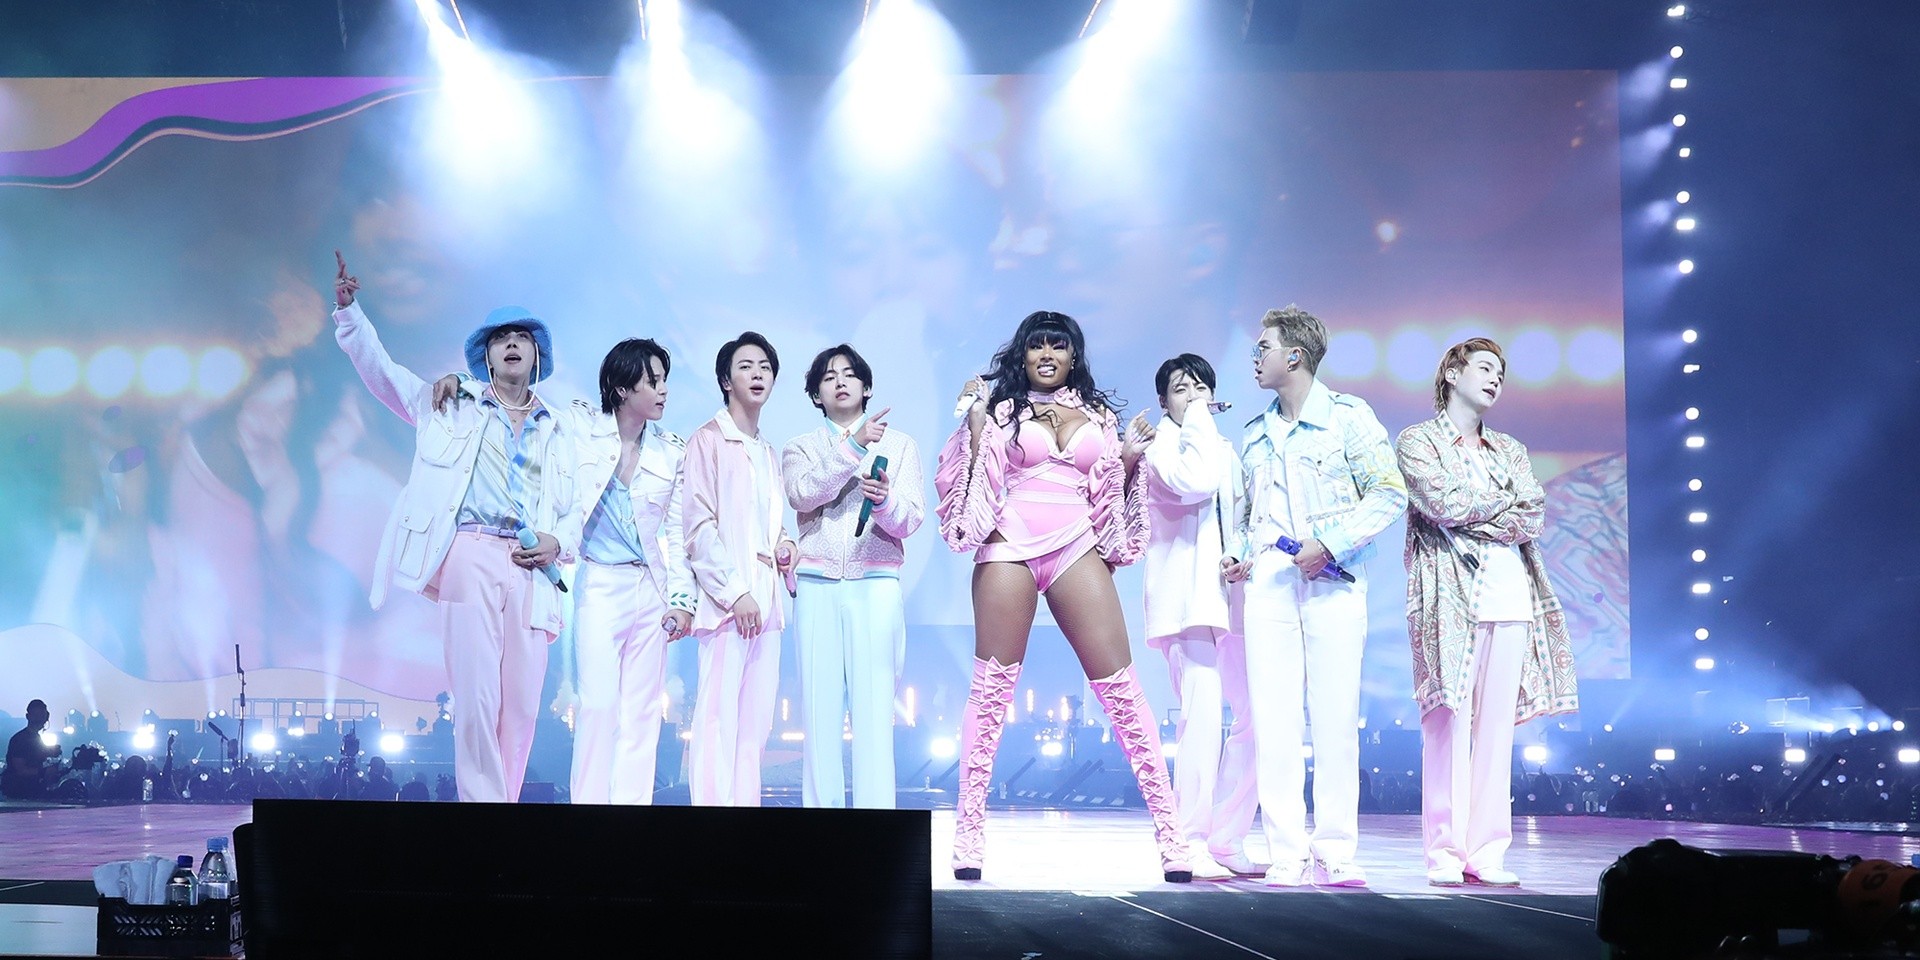 BTS and Megan Thee Stallion perform 'Butter' remix on Day 2 of PERMISSION TO DANCE ON STAGE in LA – watch